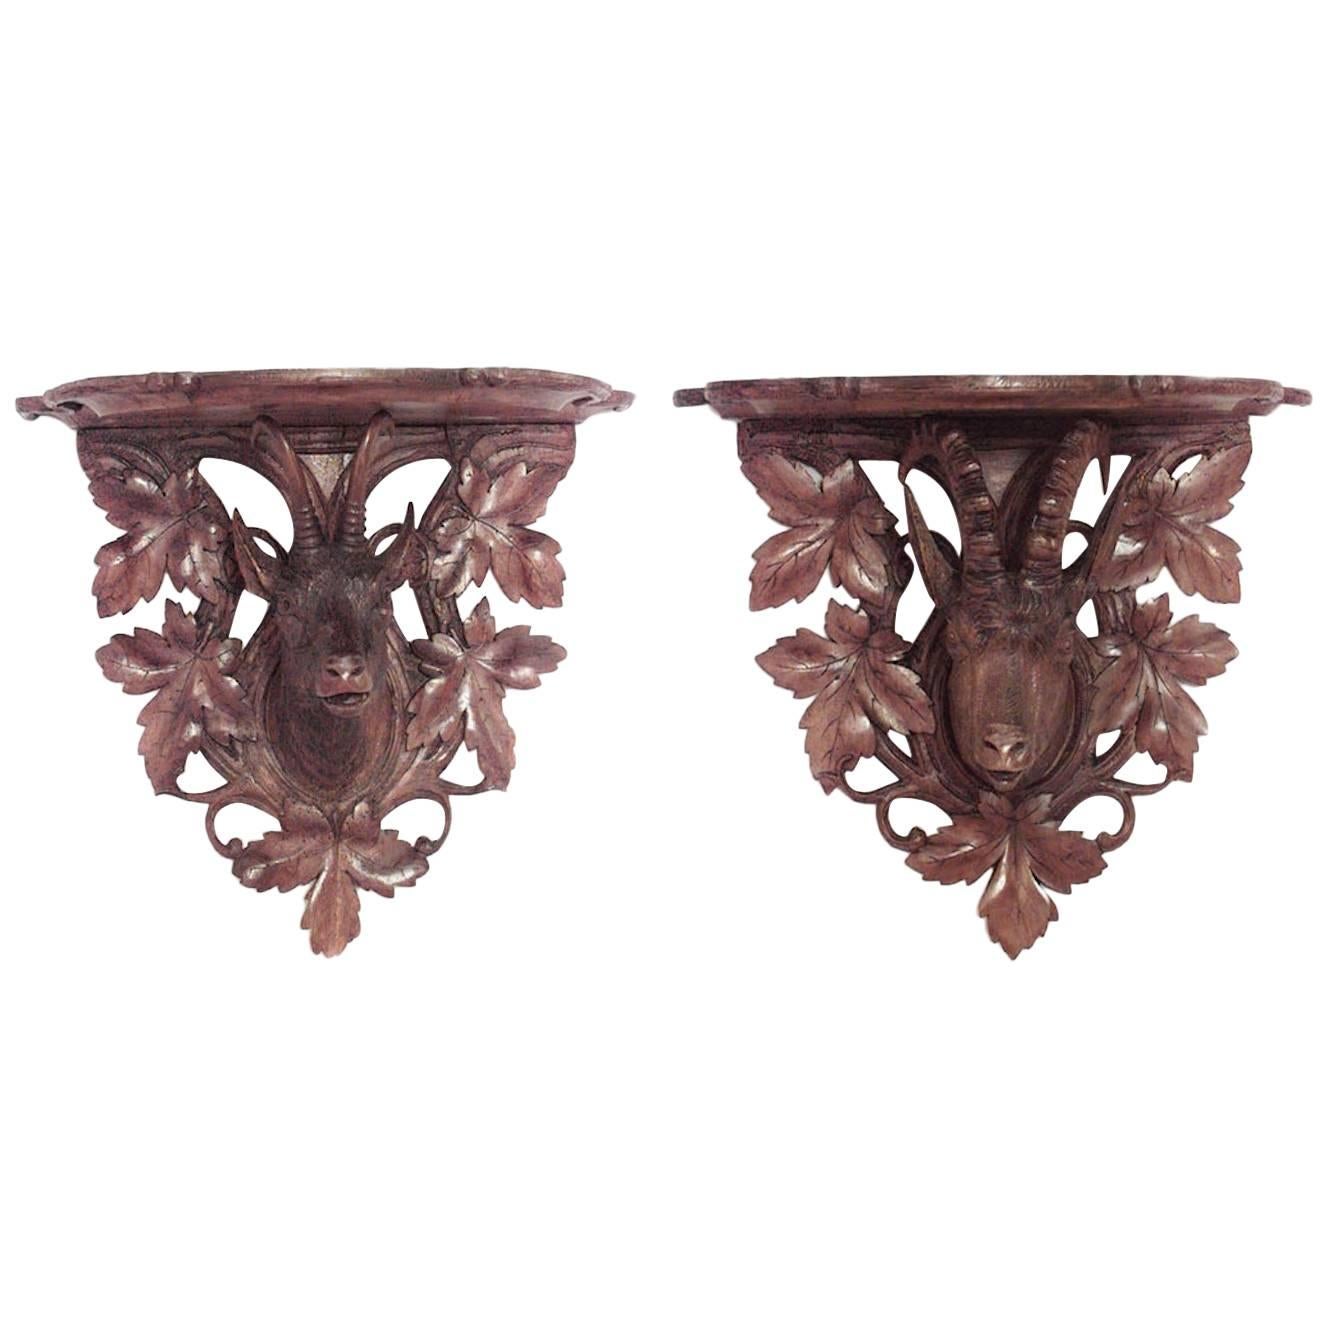 Pair of Black Forest Walnut Wall Shelves